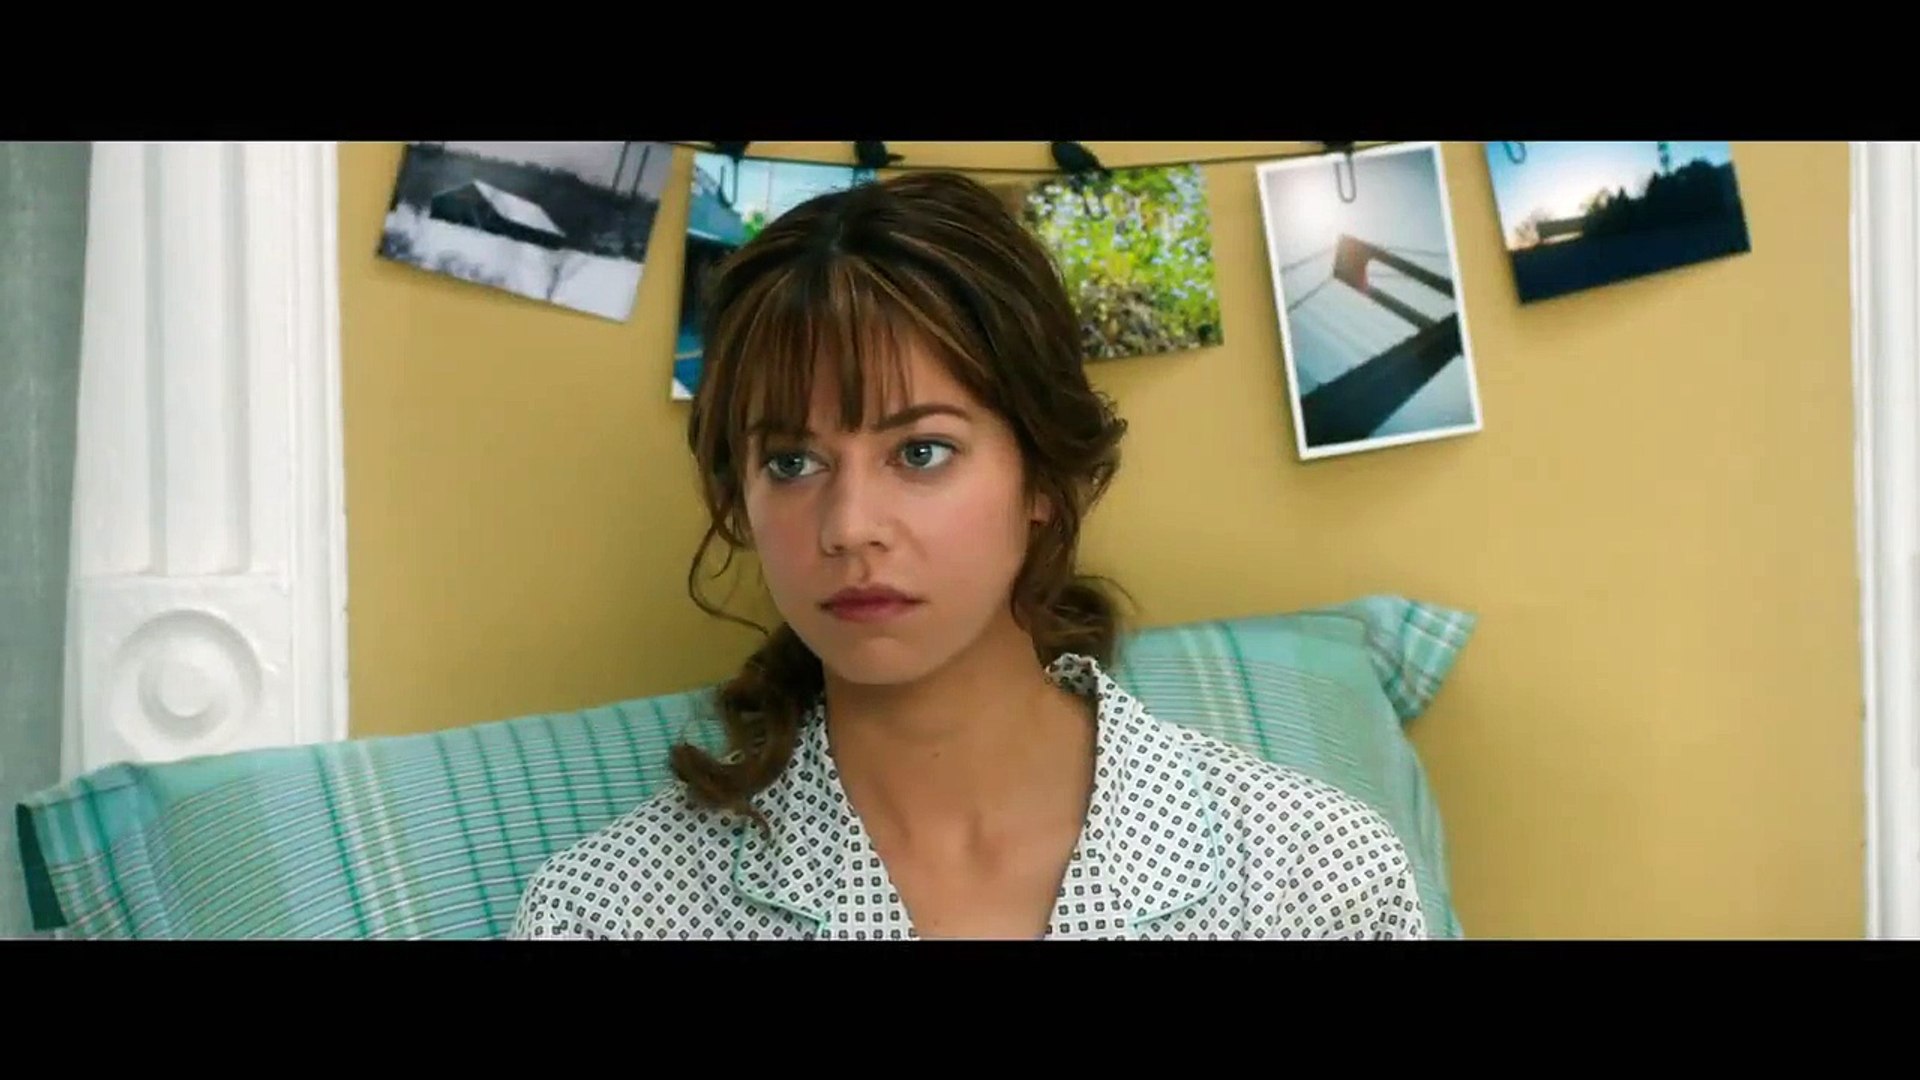 Two Night Stand Official Trailer #1 (2014) - Analeigh Tipton